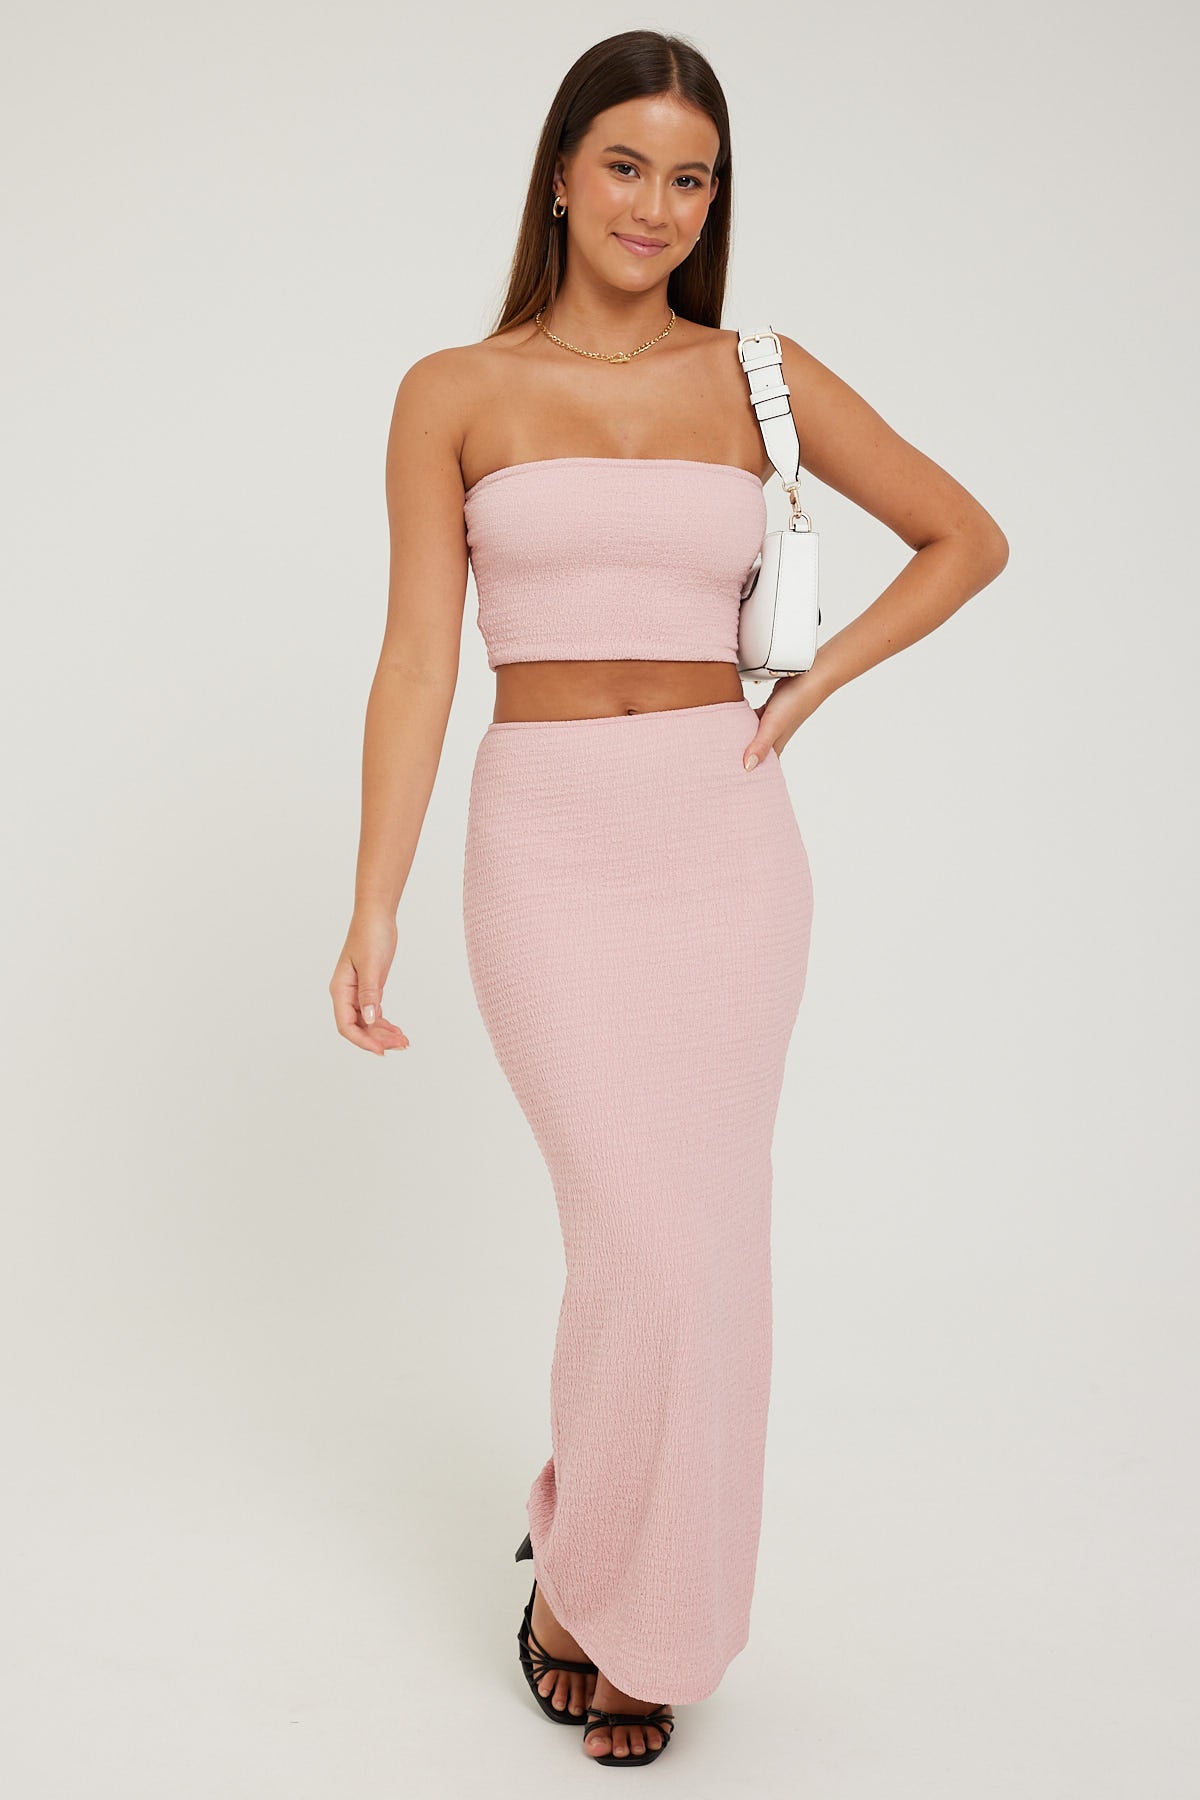 Perfect Stranger Textured Tube Top Pink